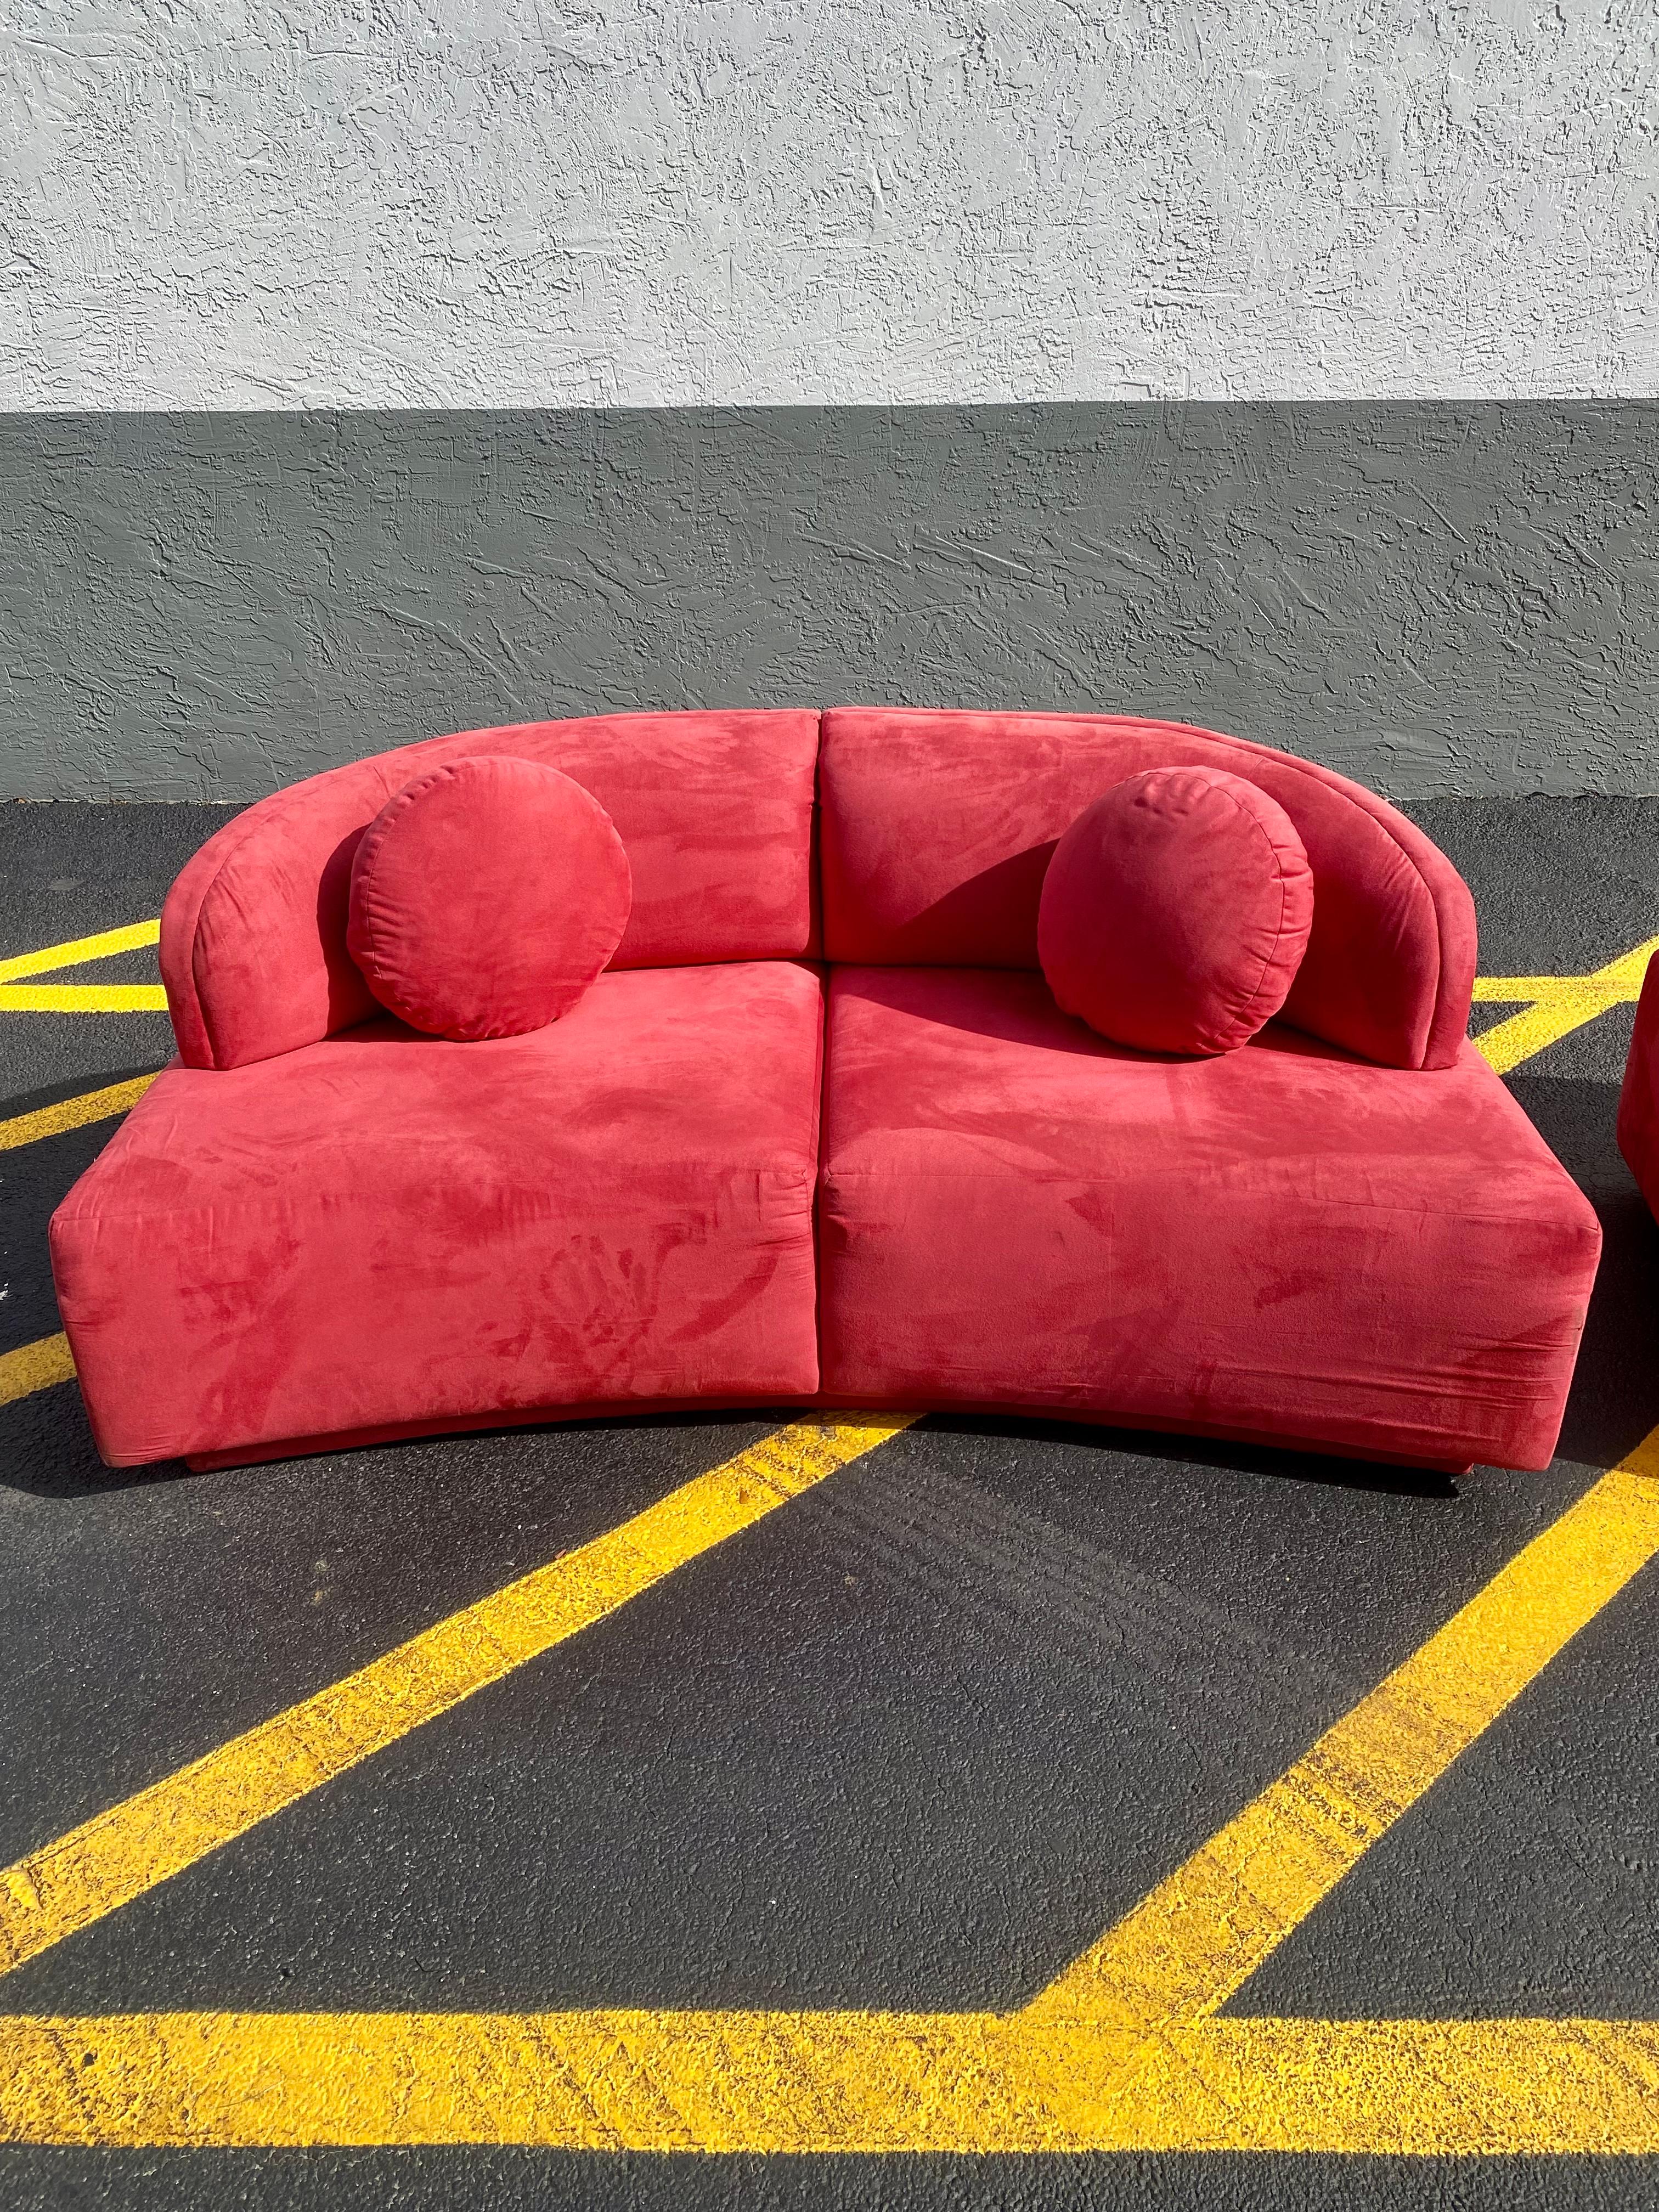 American 1980s Sculptural Weiman Red Cloud Sofa Loveseat, Set of 2 For Sale